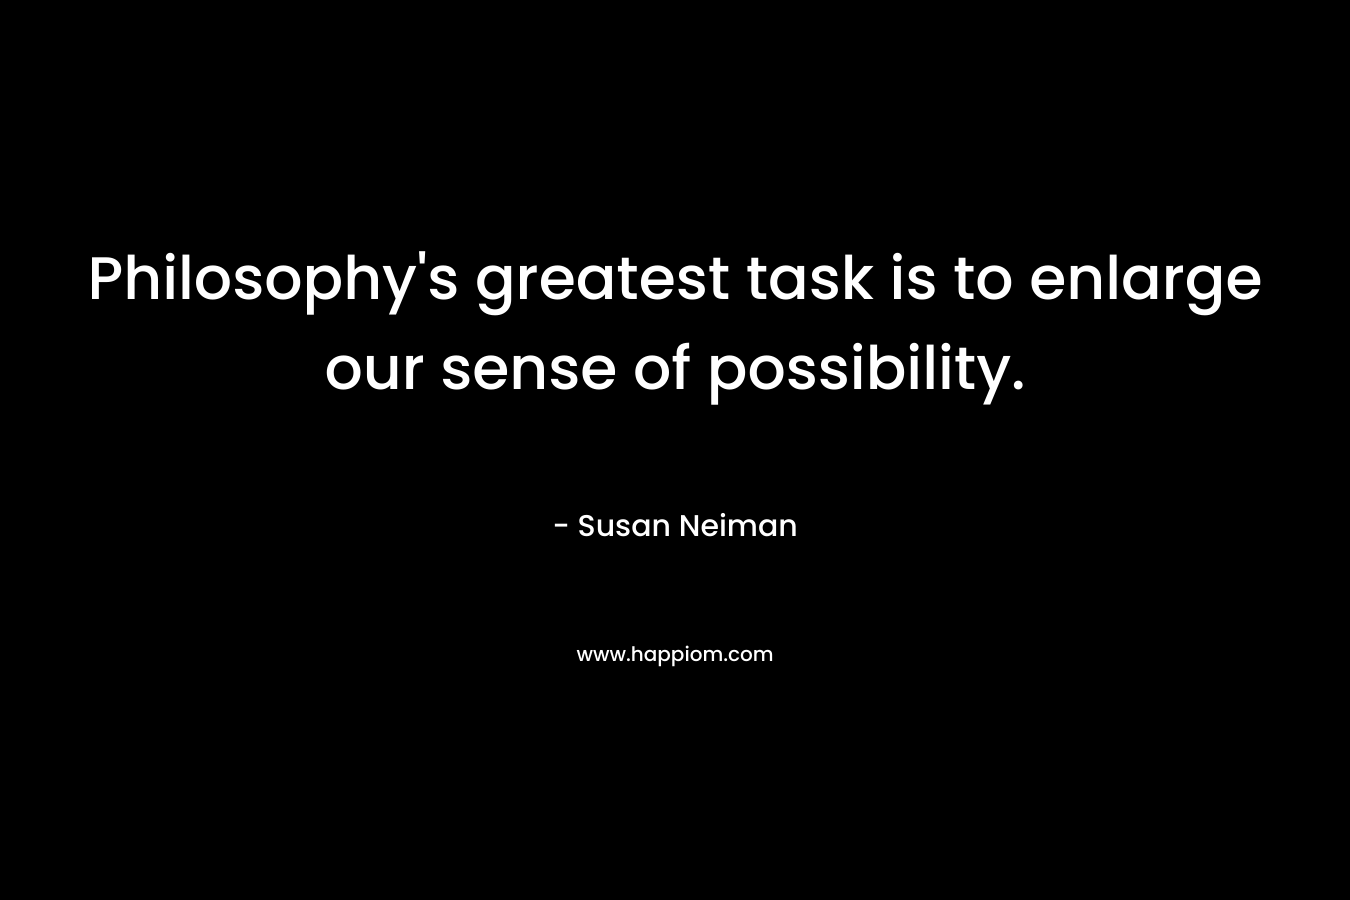 Philosophy's greatest task is to enlarge our sense of possibility.